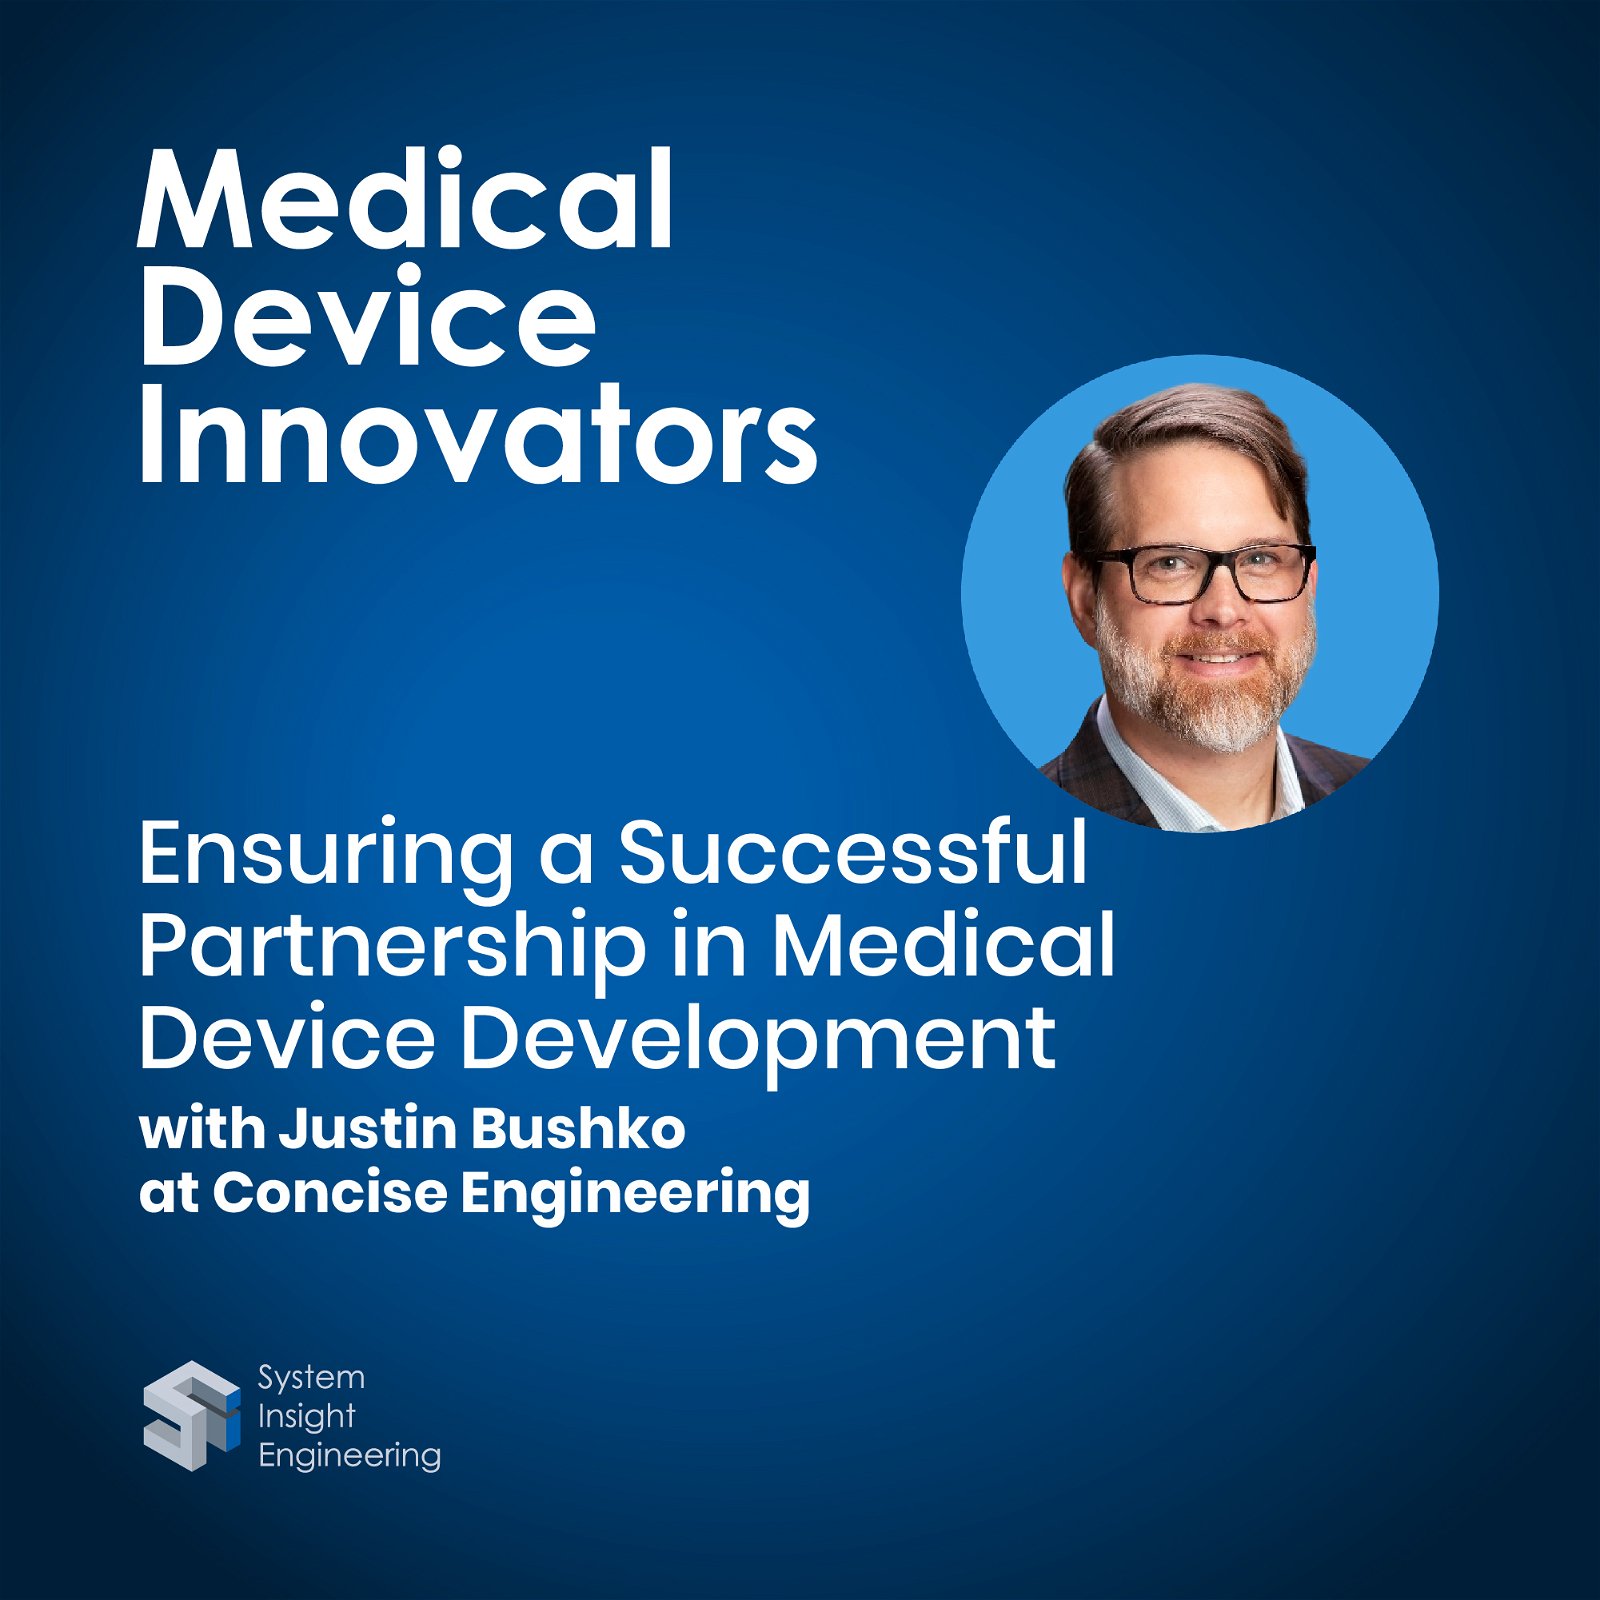 Ensuring a Successful Partnership in Medical Device Development with Justin Bushko at Concise Engineering